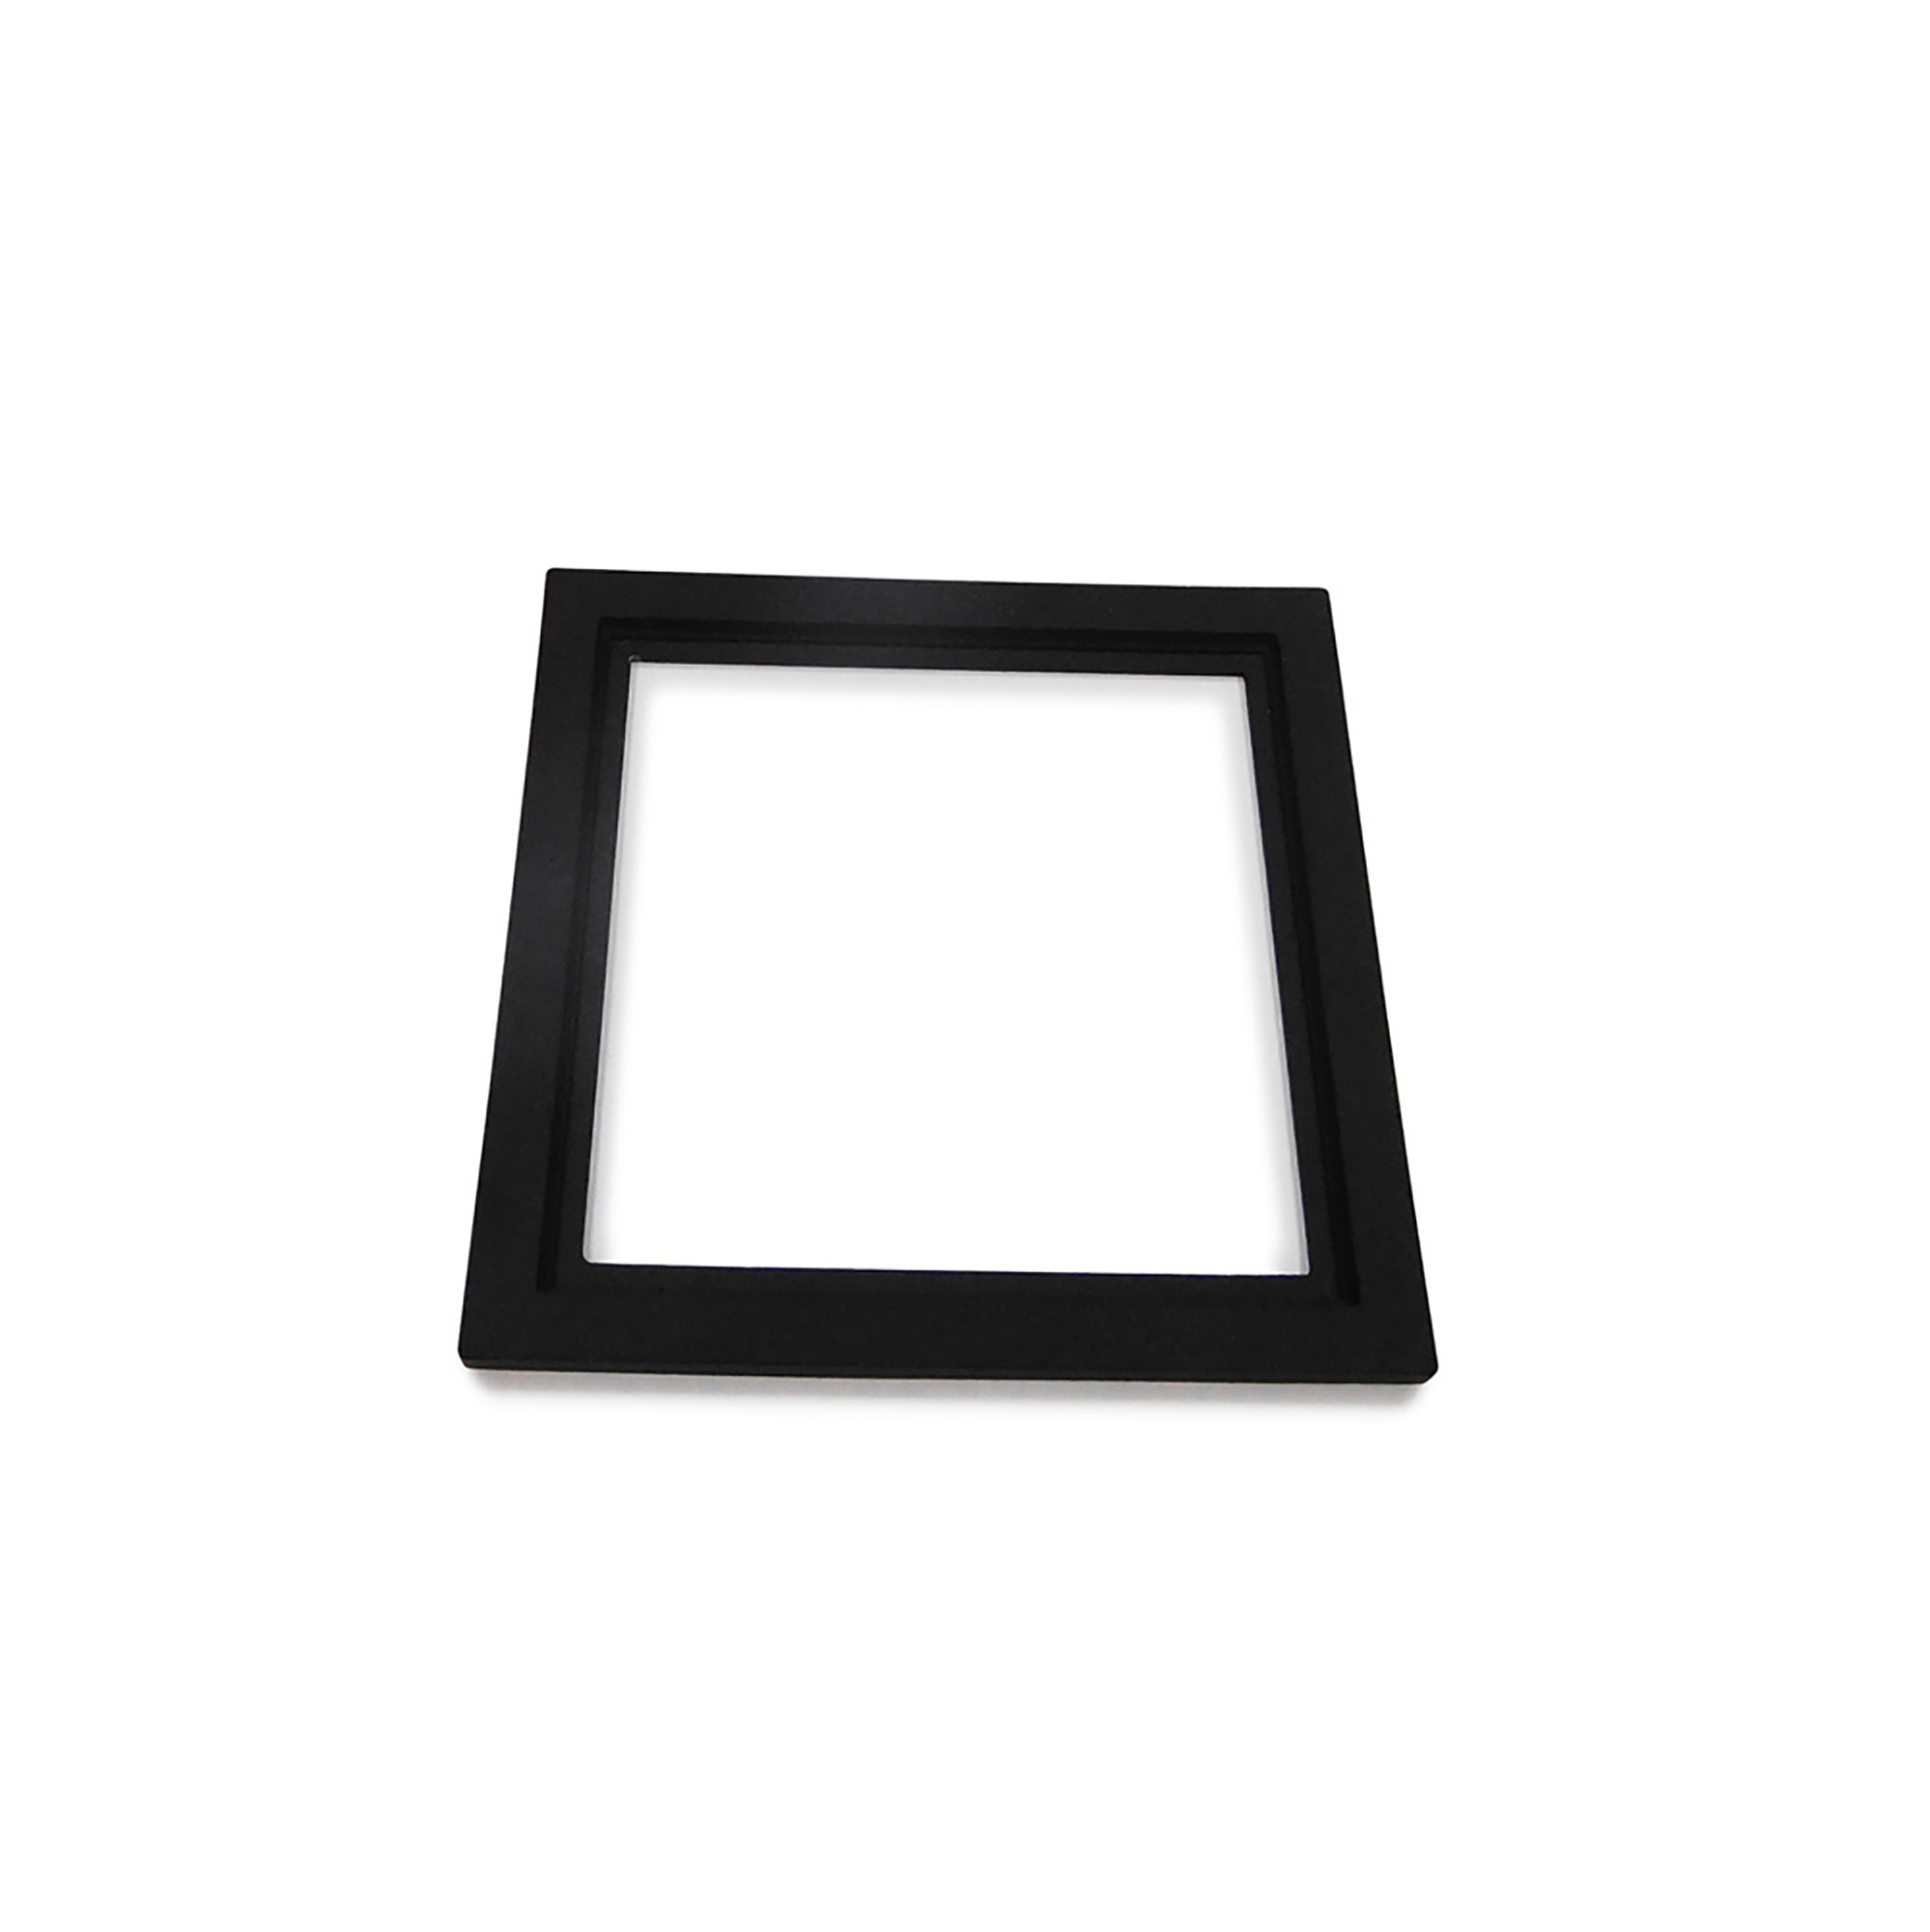 DX210044  Biox 90x90mm Black Square Frame Suitable For Biox Downlight